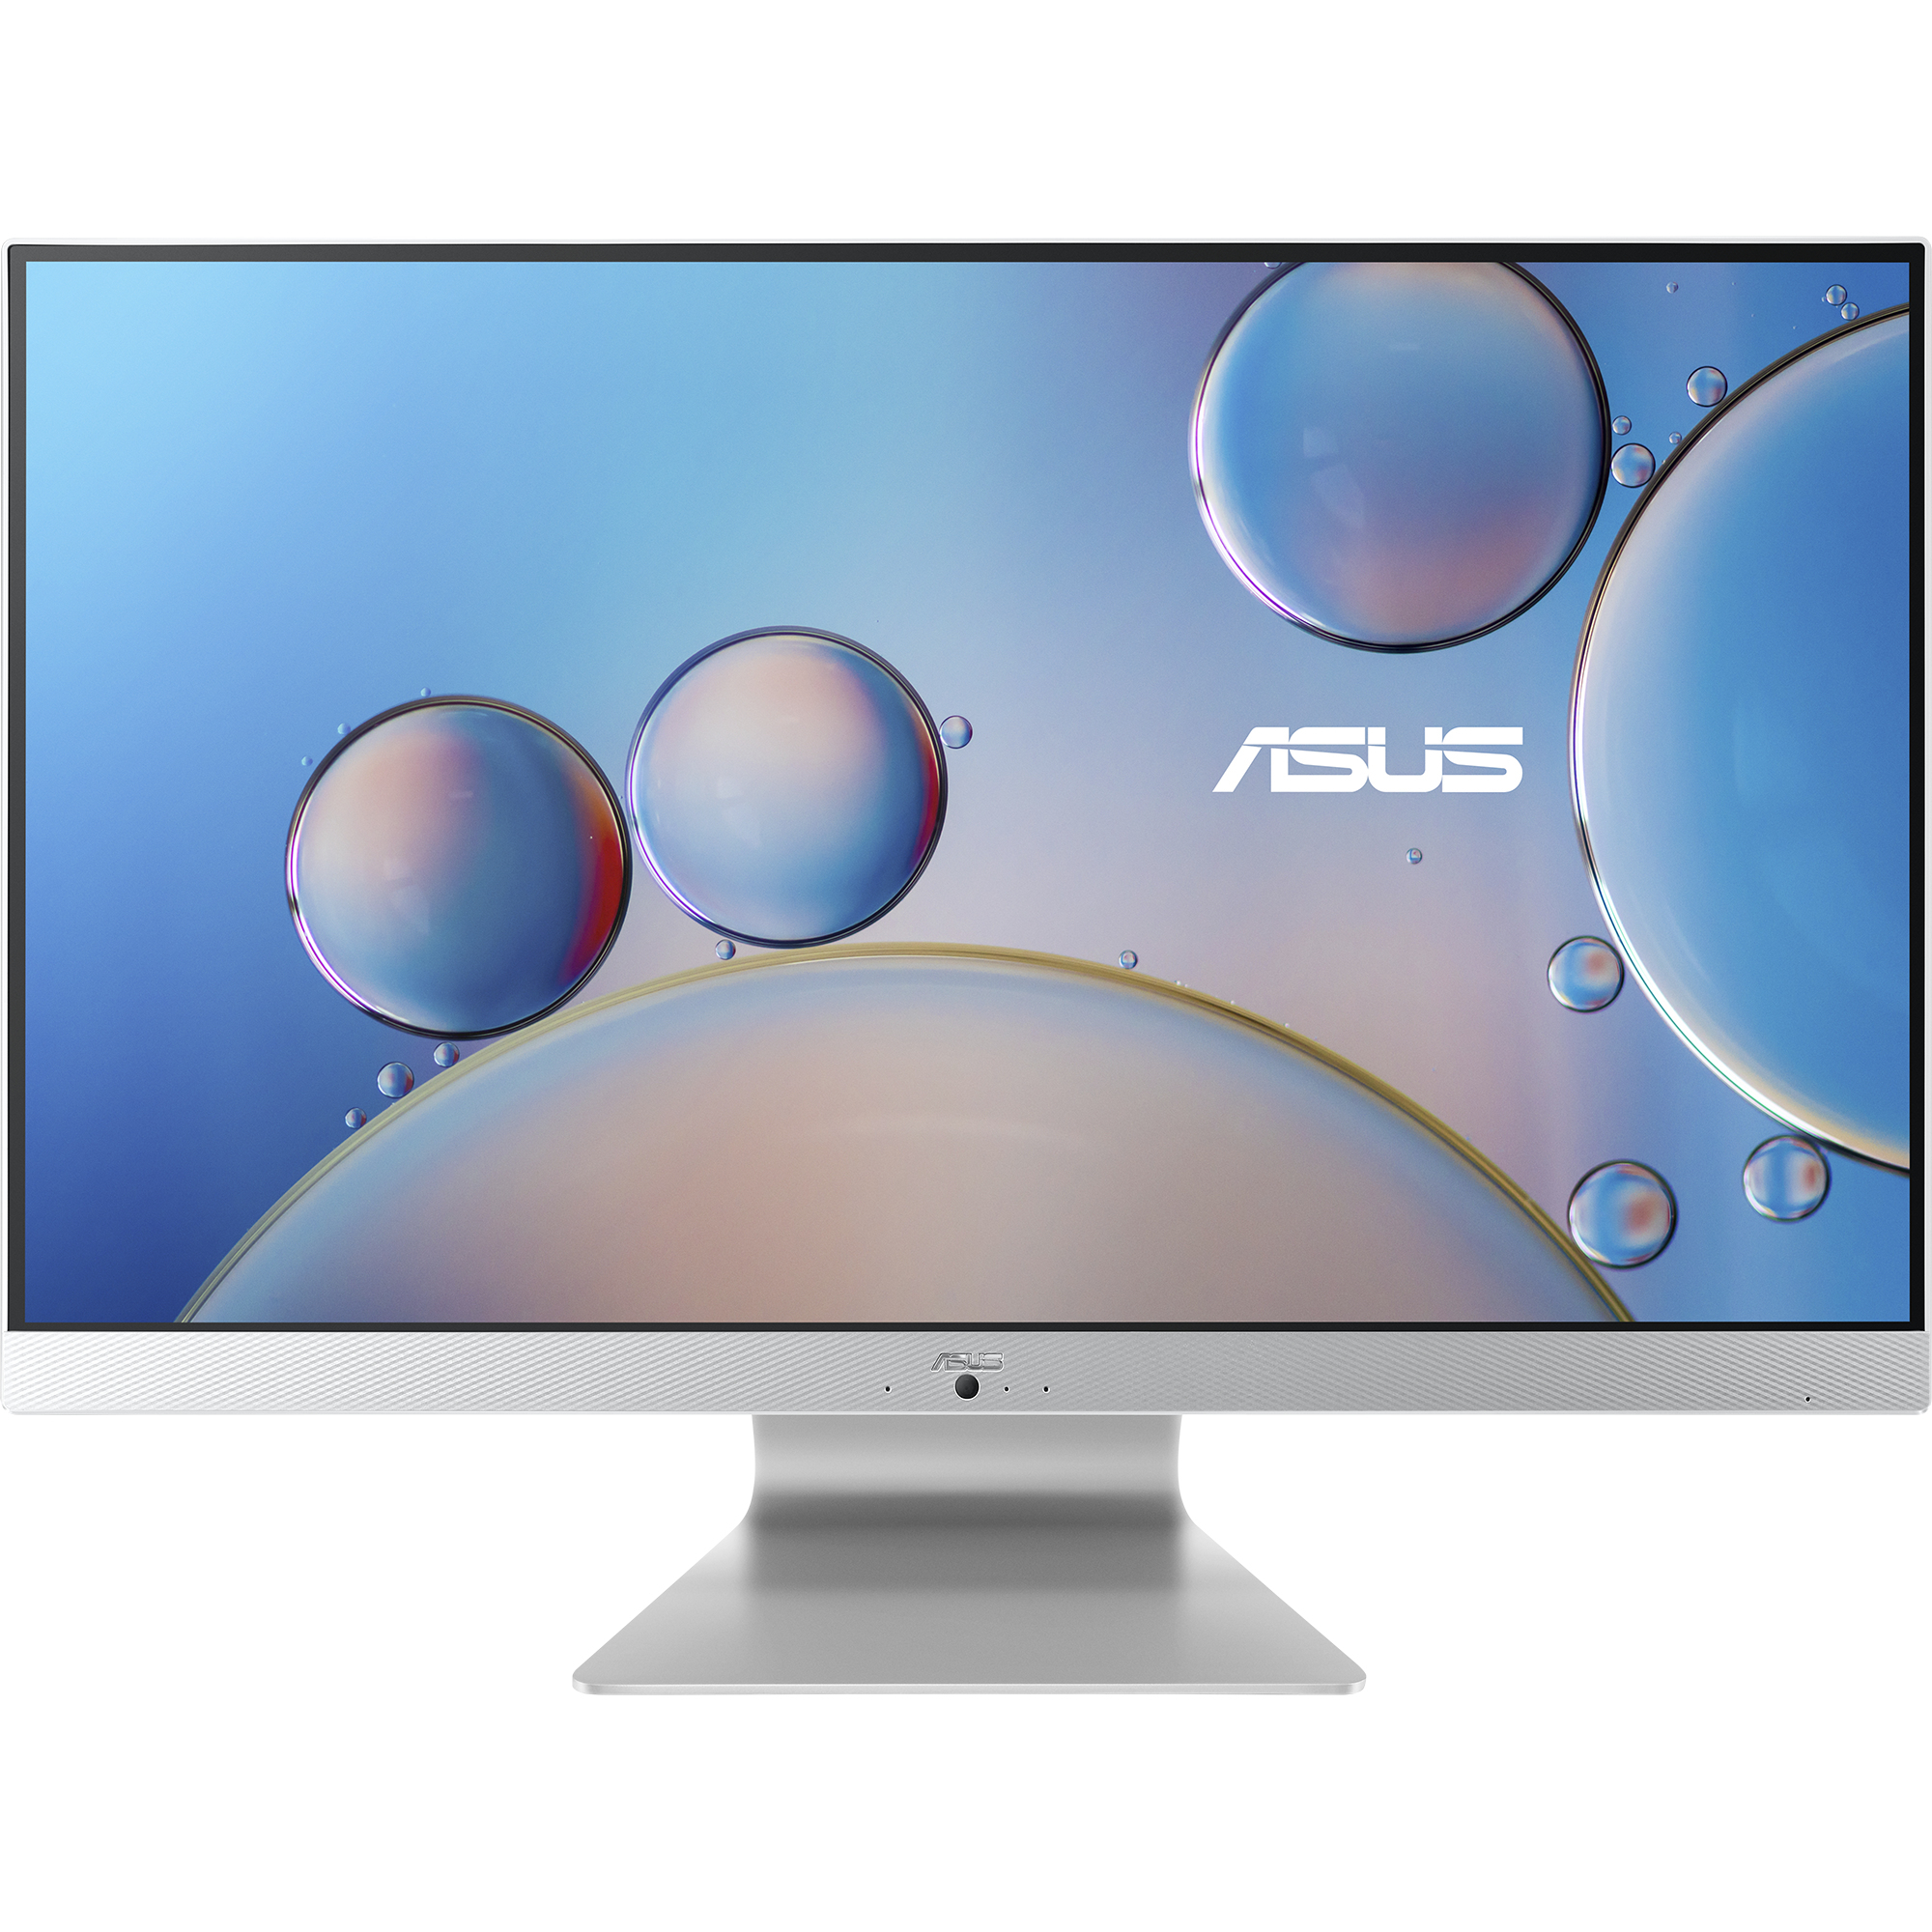 ASUS M3700WUAK-WA013W All-in-One PC/workstation